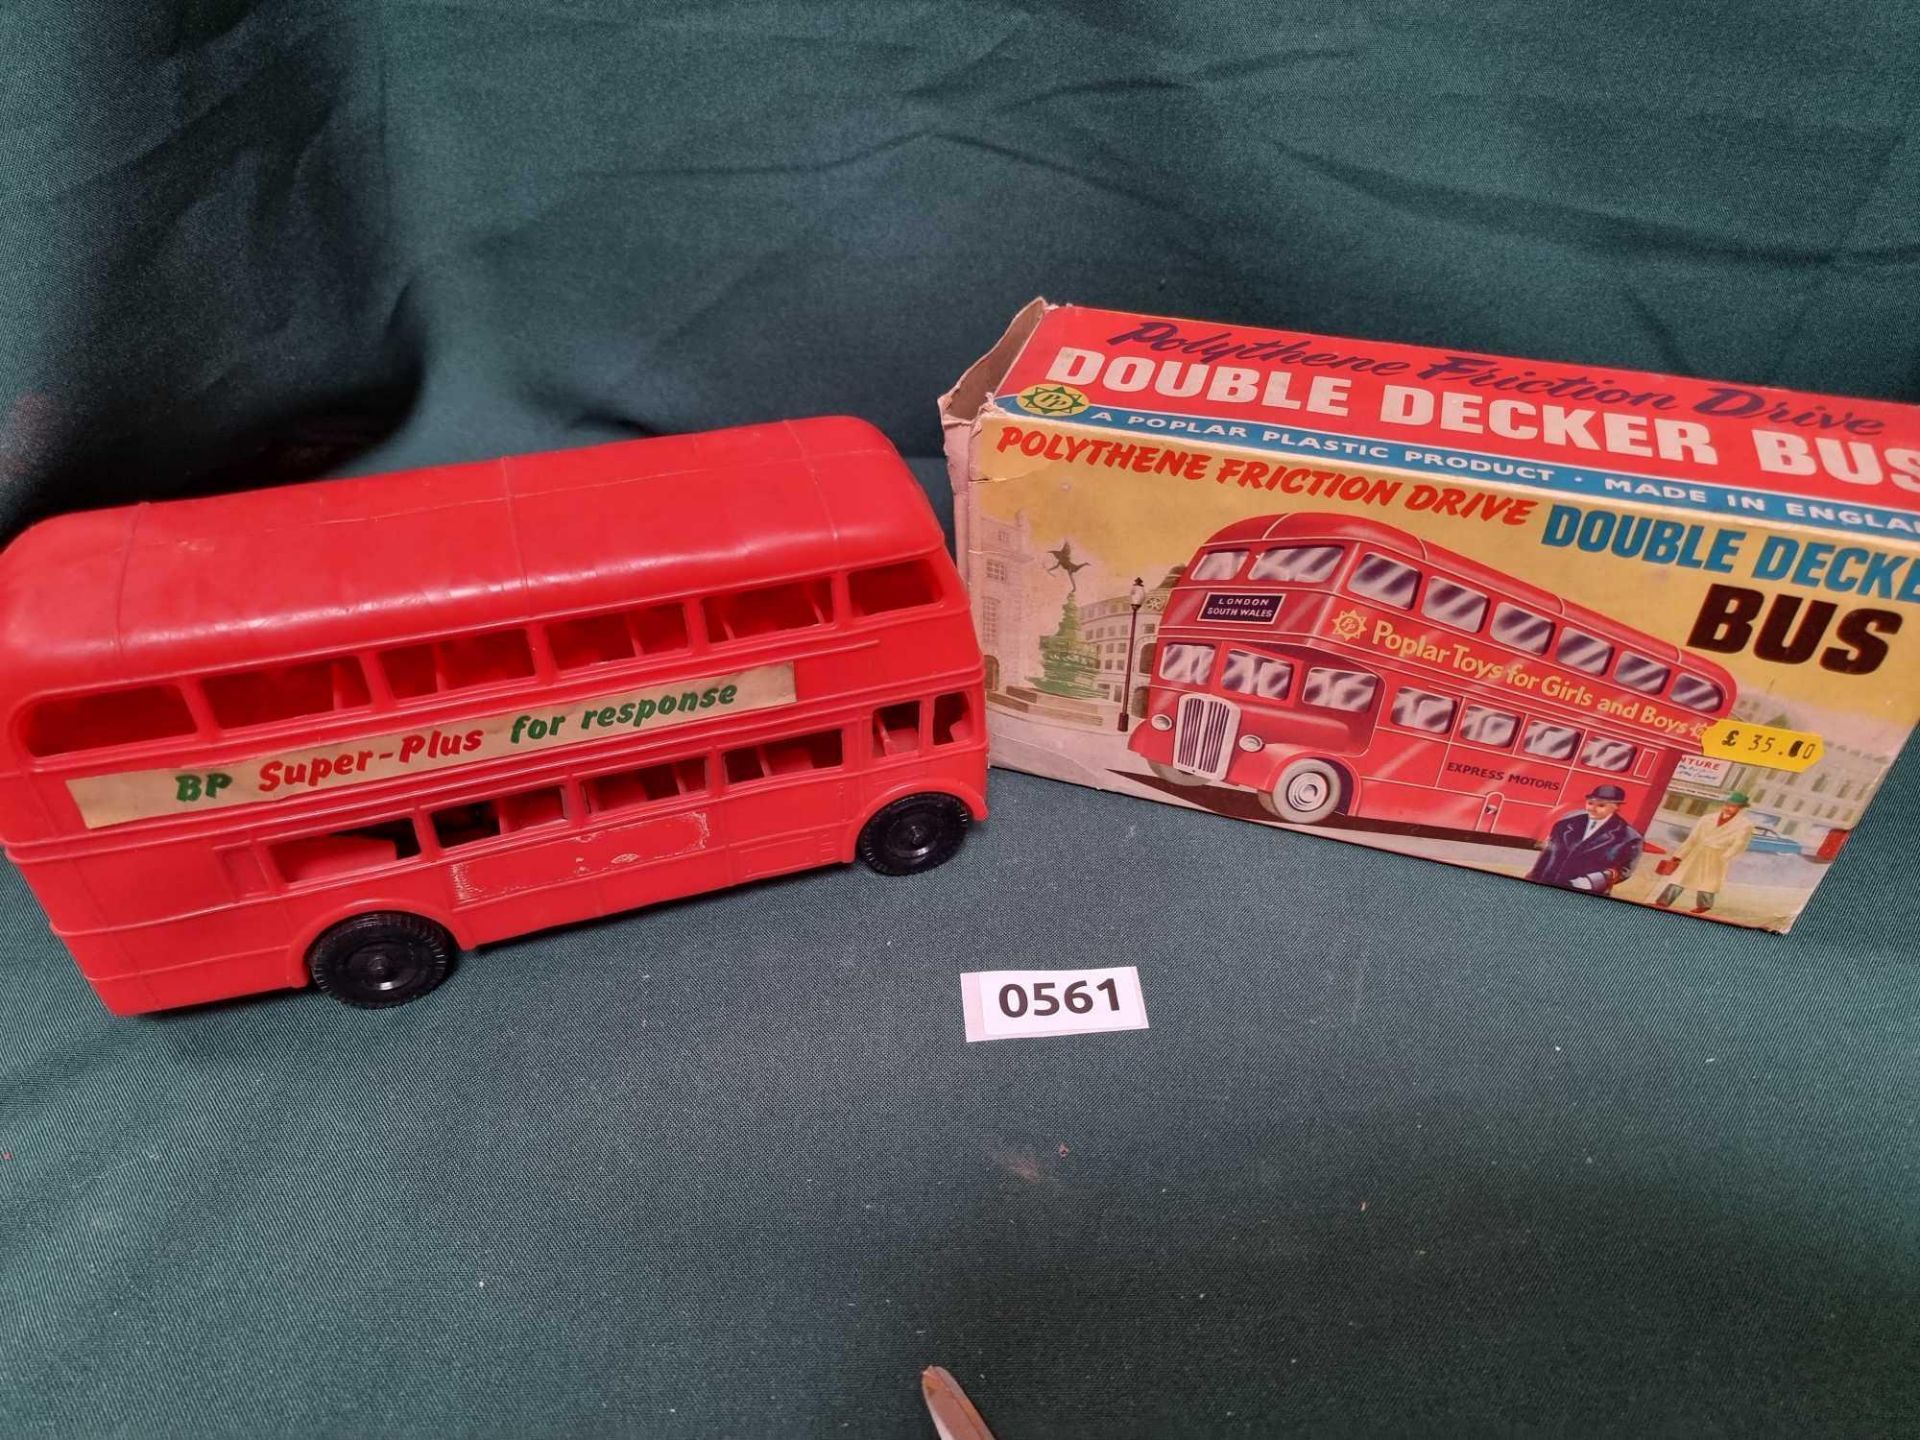 Poplar Plastics Polythene Friction Drive Double Decker Bus In Box Made In England With Original Box